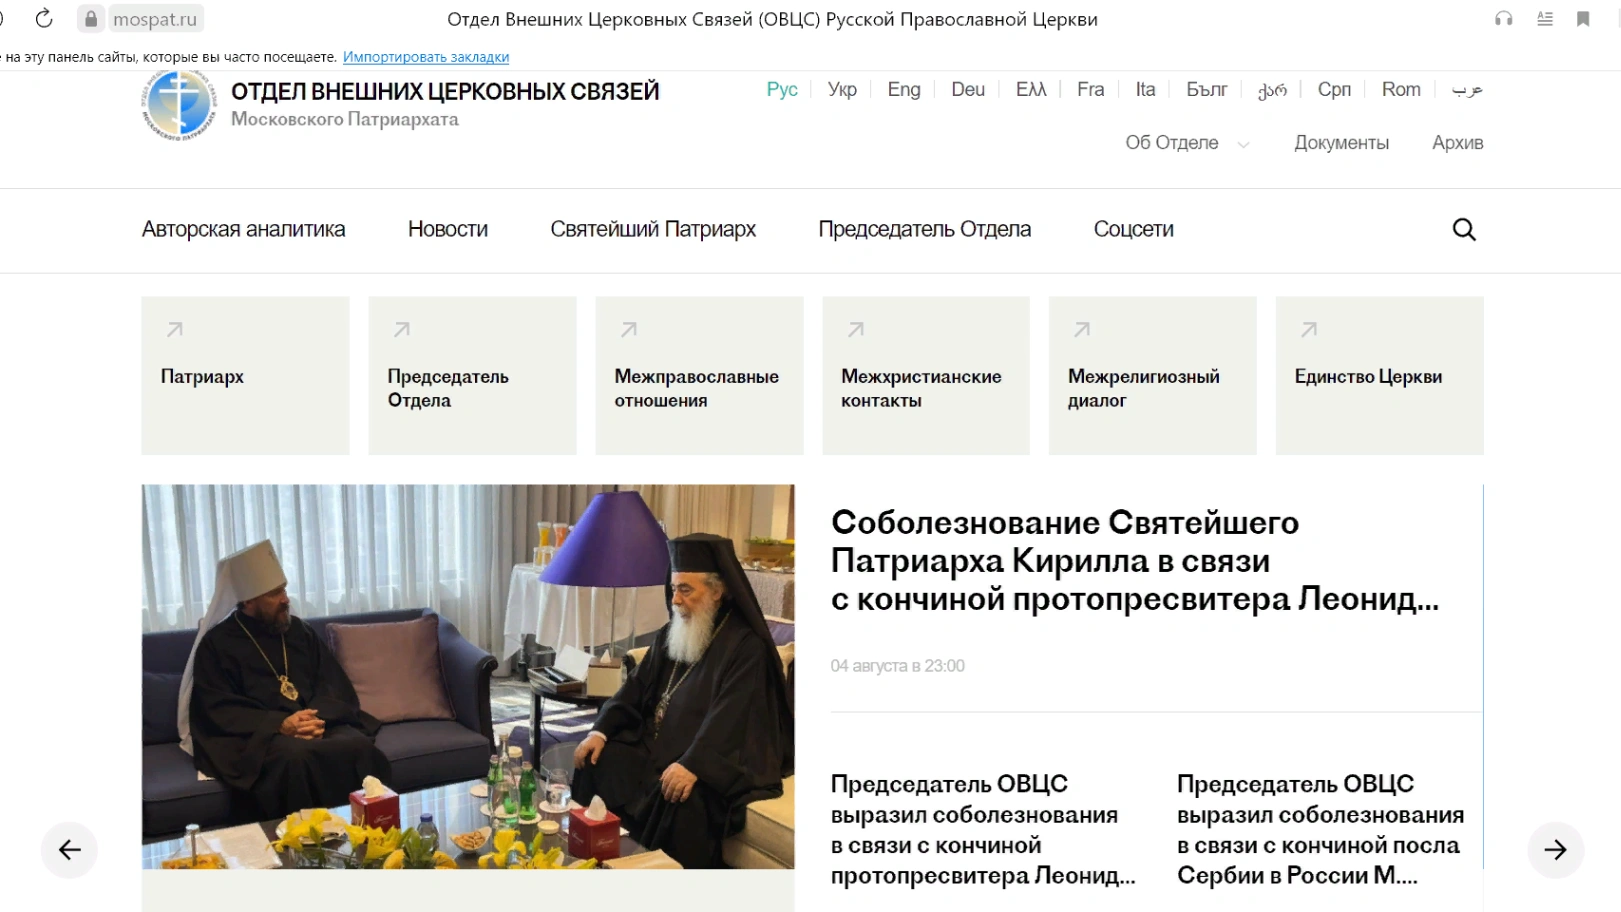 Creation of a website covering the external activities of the Russian Orthodox Church